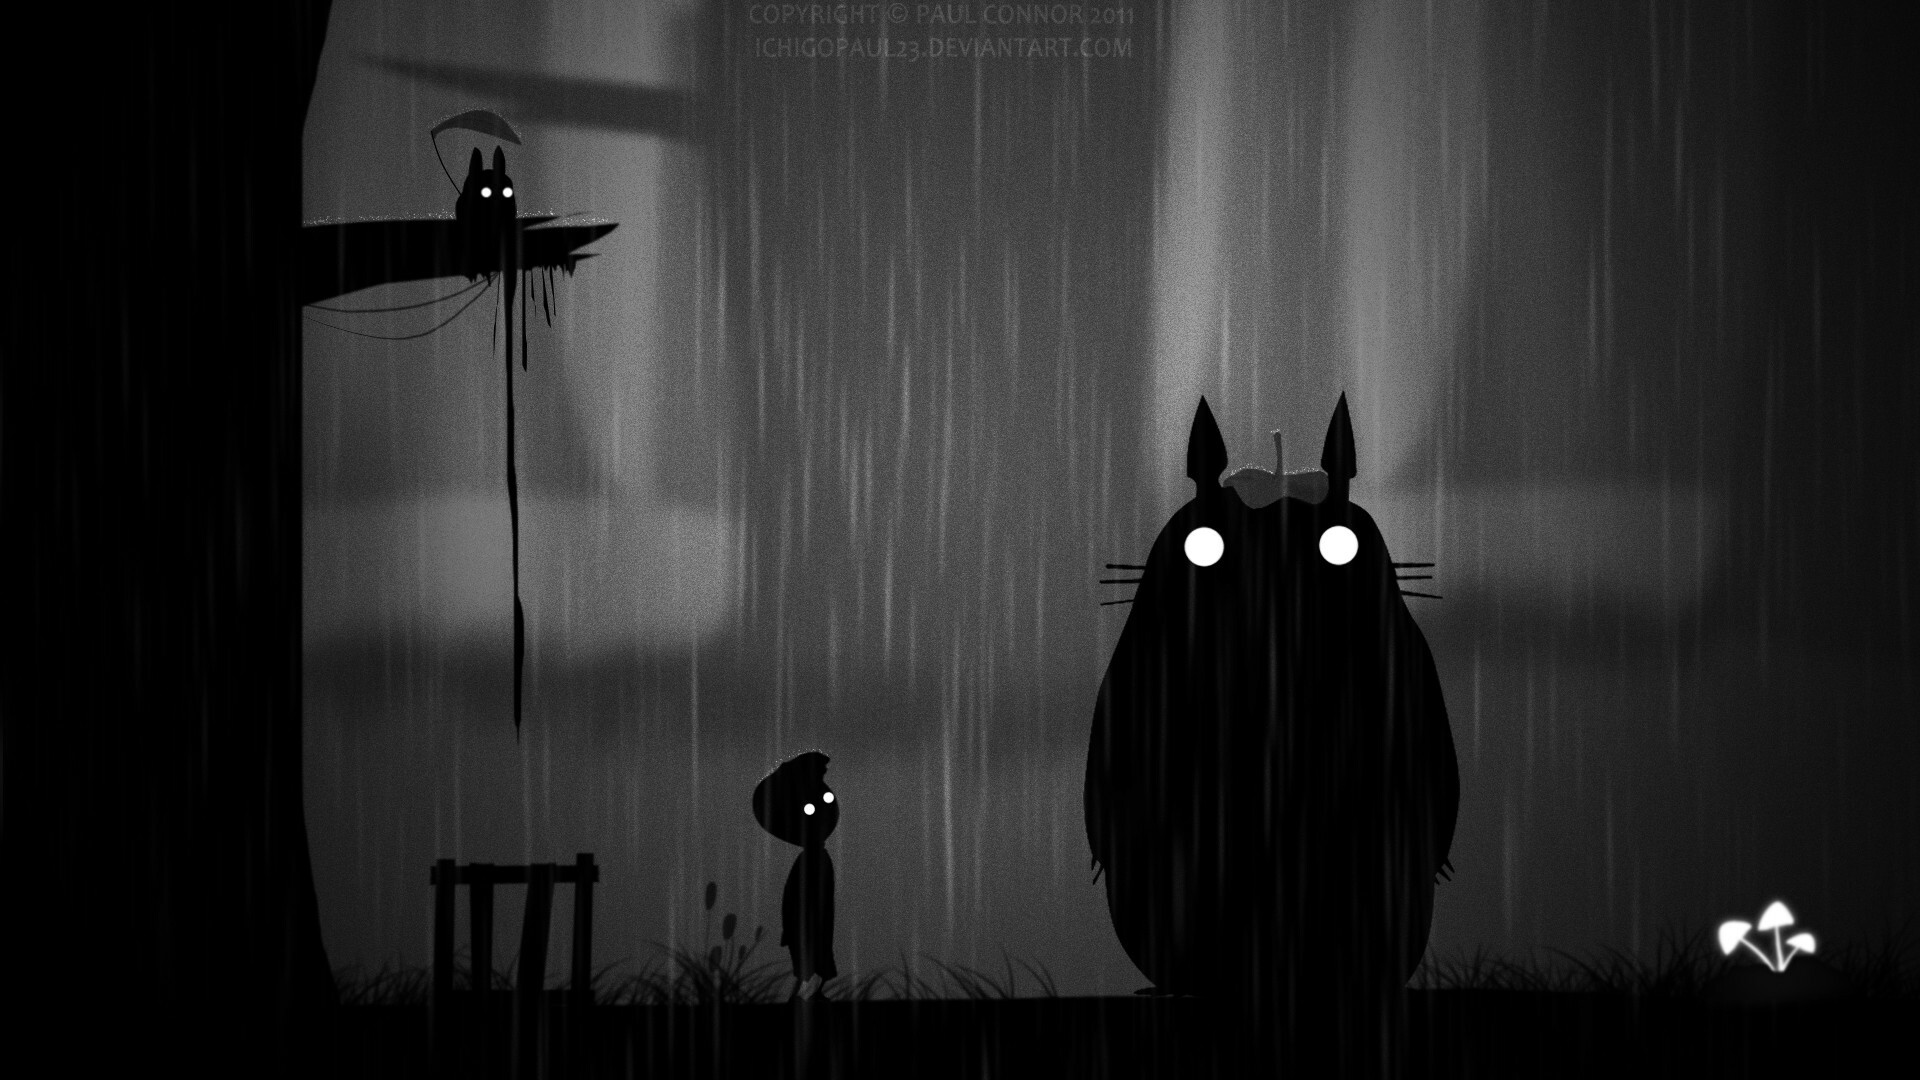 Limbo: The game was nominated for the committee-determined BAFTA awards for "Artistic Achievement", "Use of Audio", "Gameplay" and "Best Game". 1920x1080 Full HD Background.